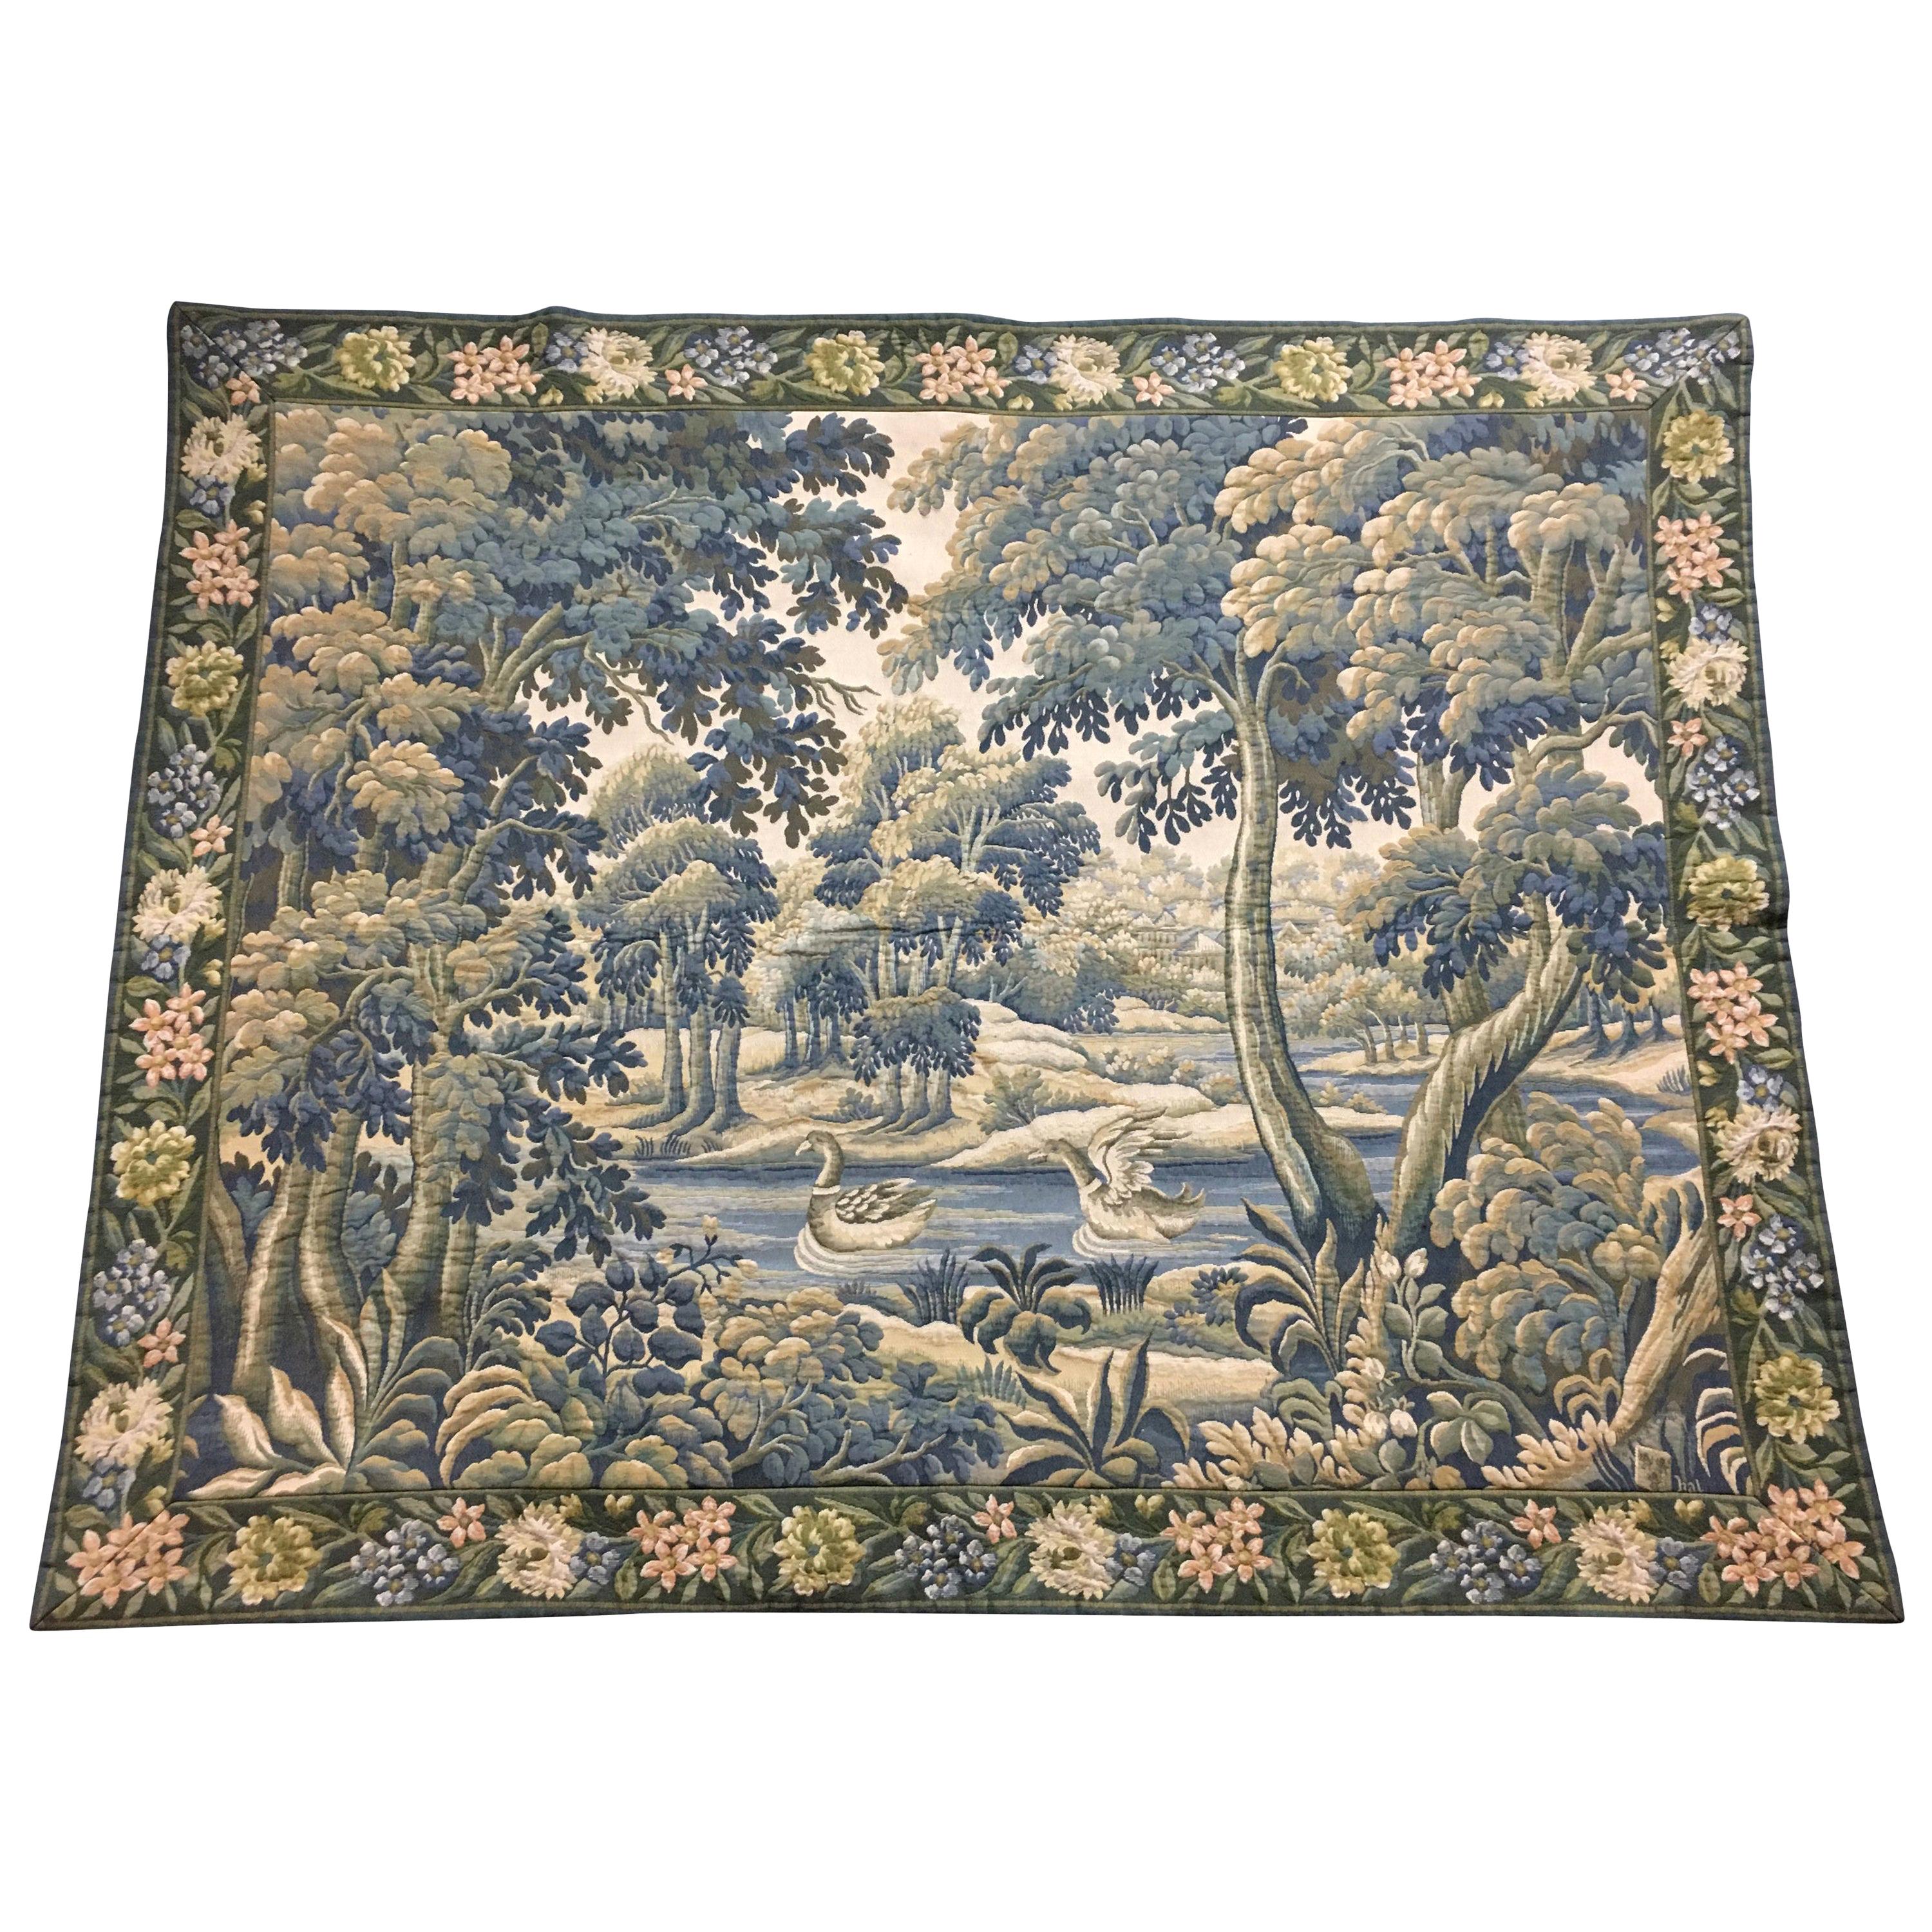 French Aubusson Style Verdure Tapestry with Rivers, Ducks, and Foliage